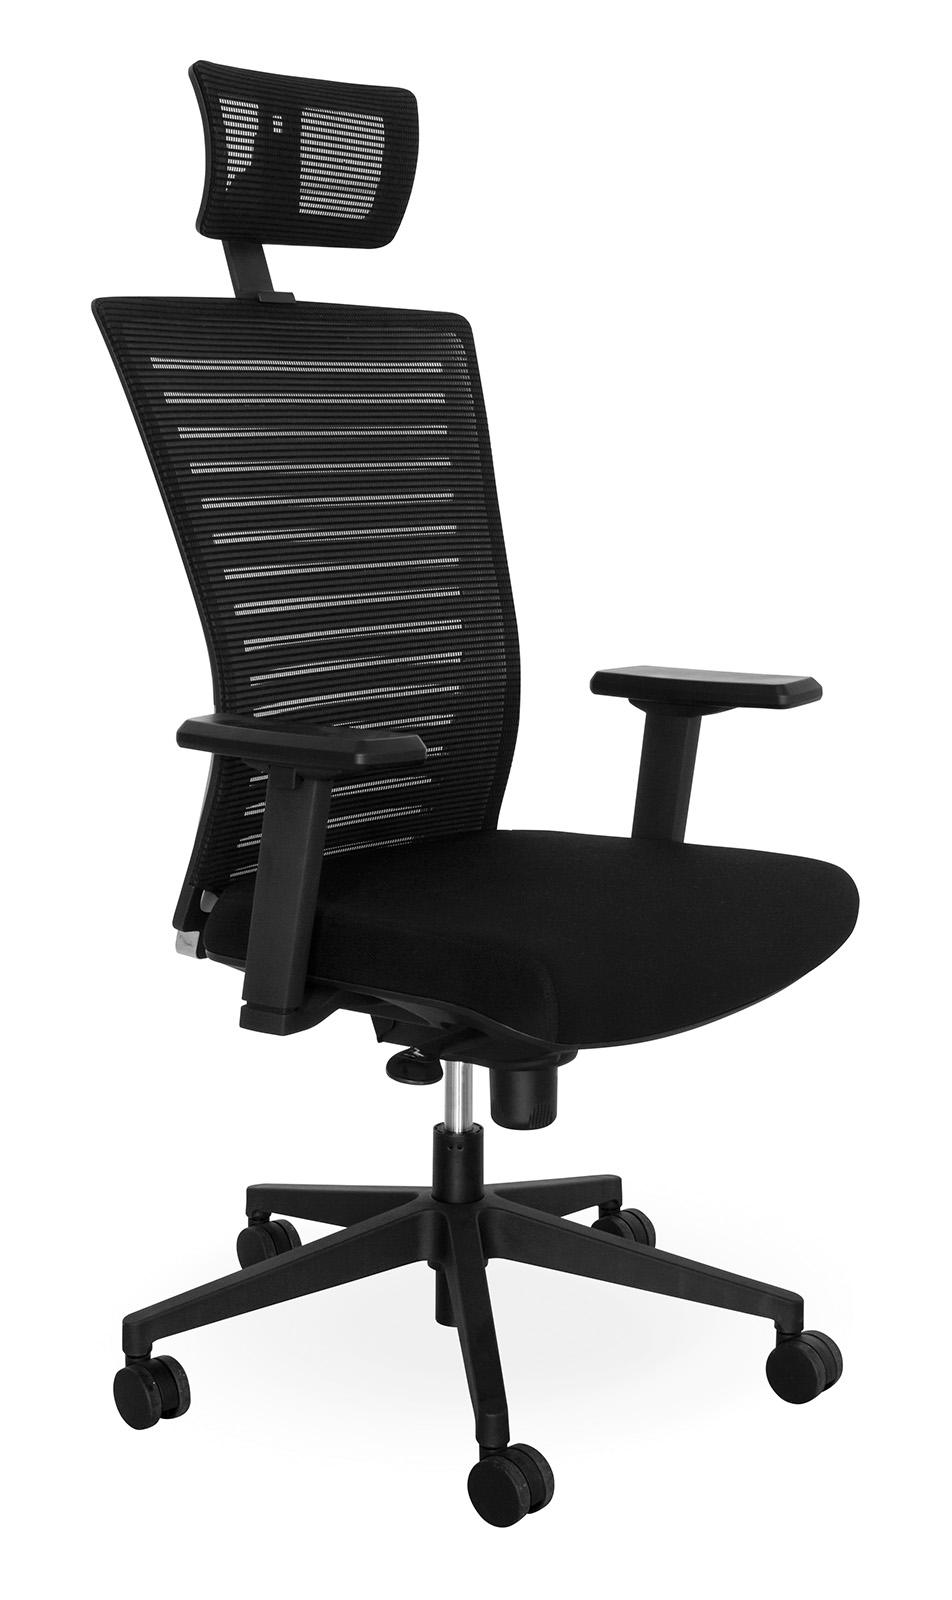 Ergonomic office chair designed with your comfort in mind.